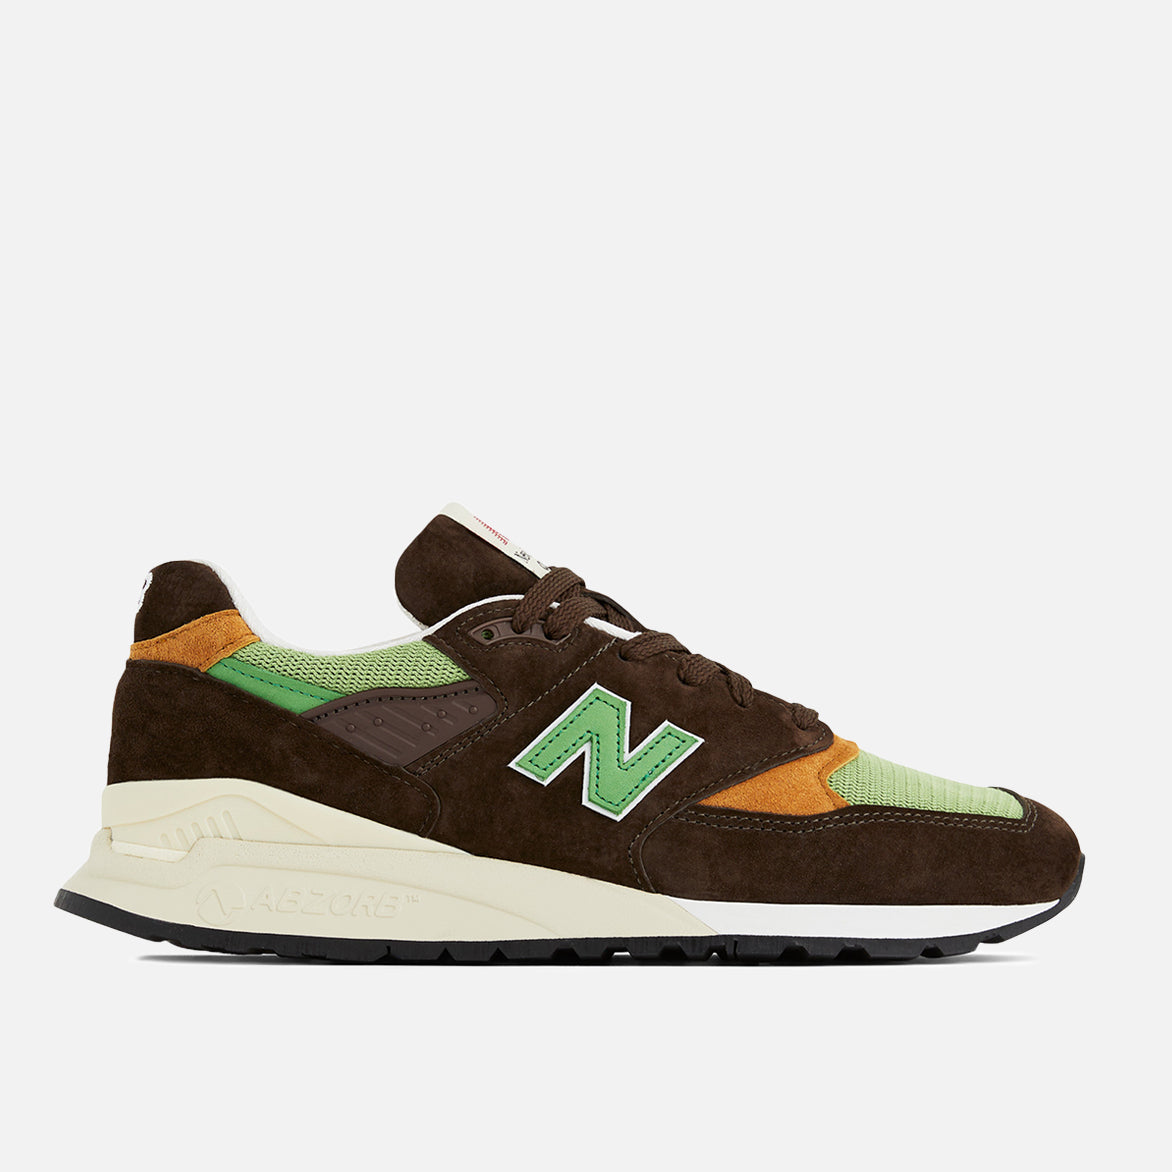 NB MADE IN USA 998 "BROWN / GREEN"